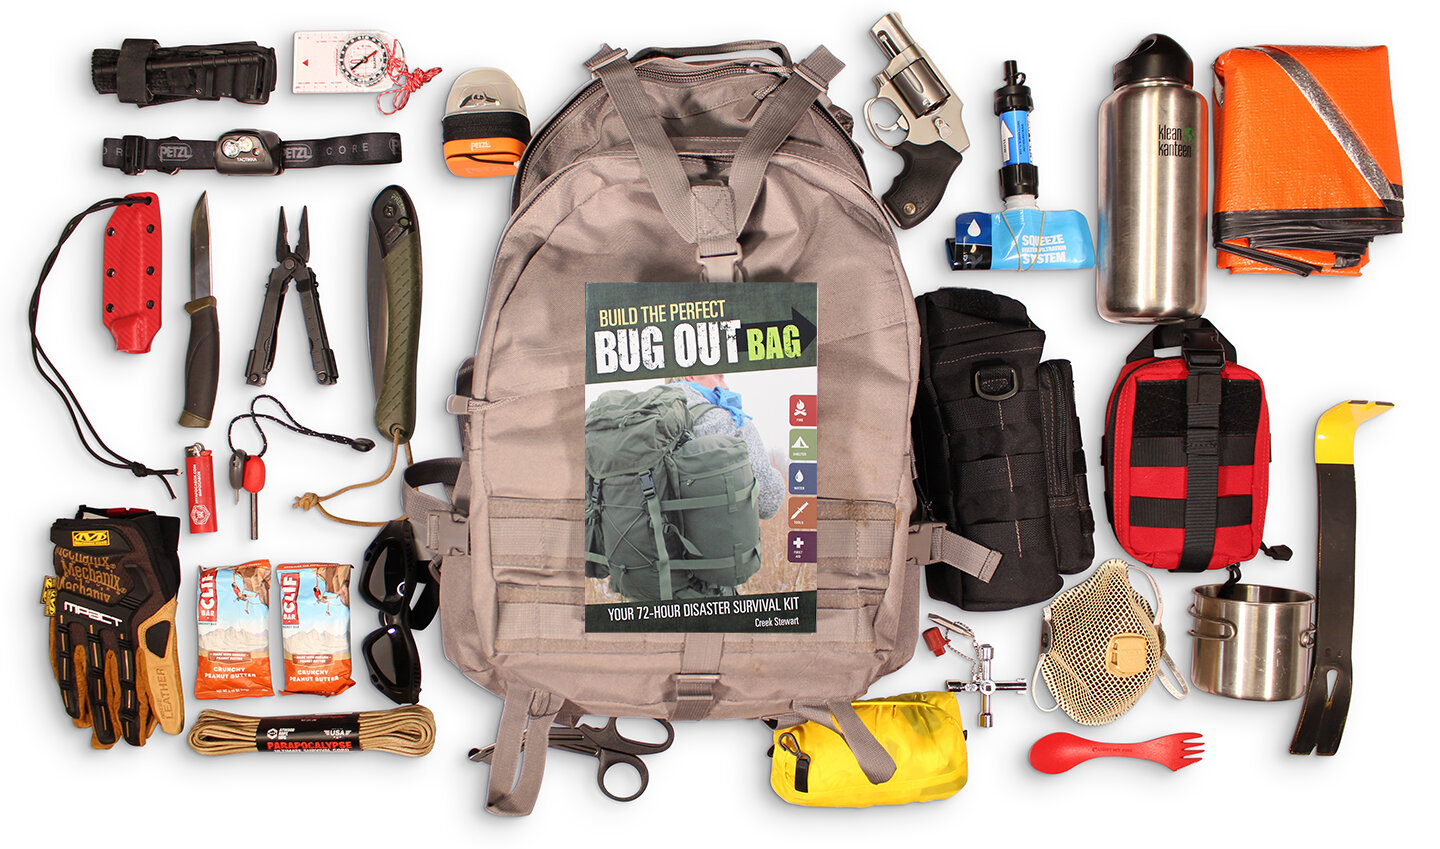 Emergency Disaster Guide Bug Out Bag Kit Book Shelter Fire Water Survival 